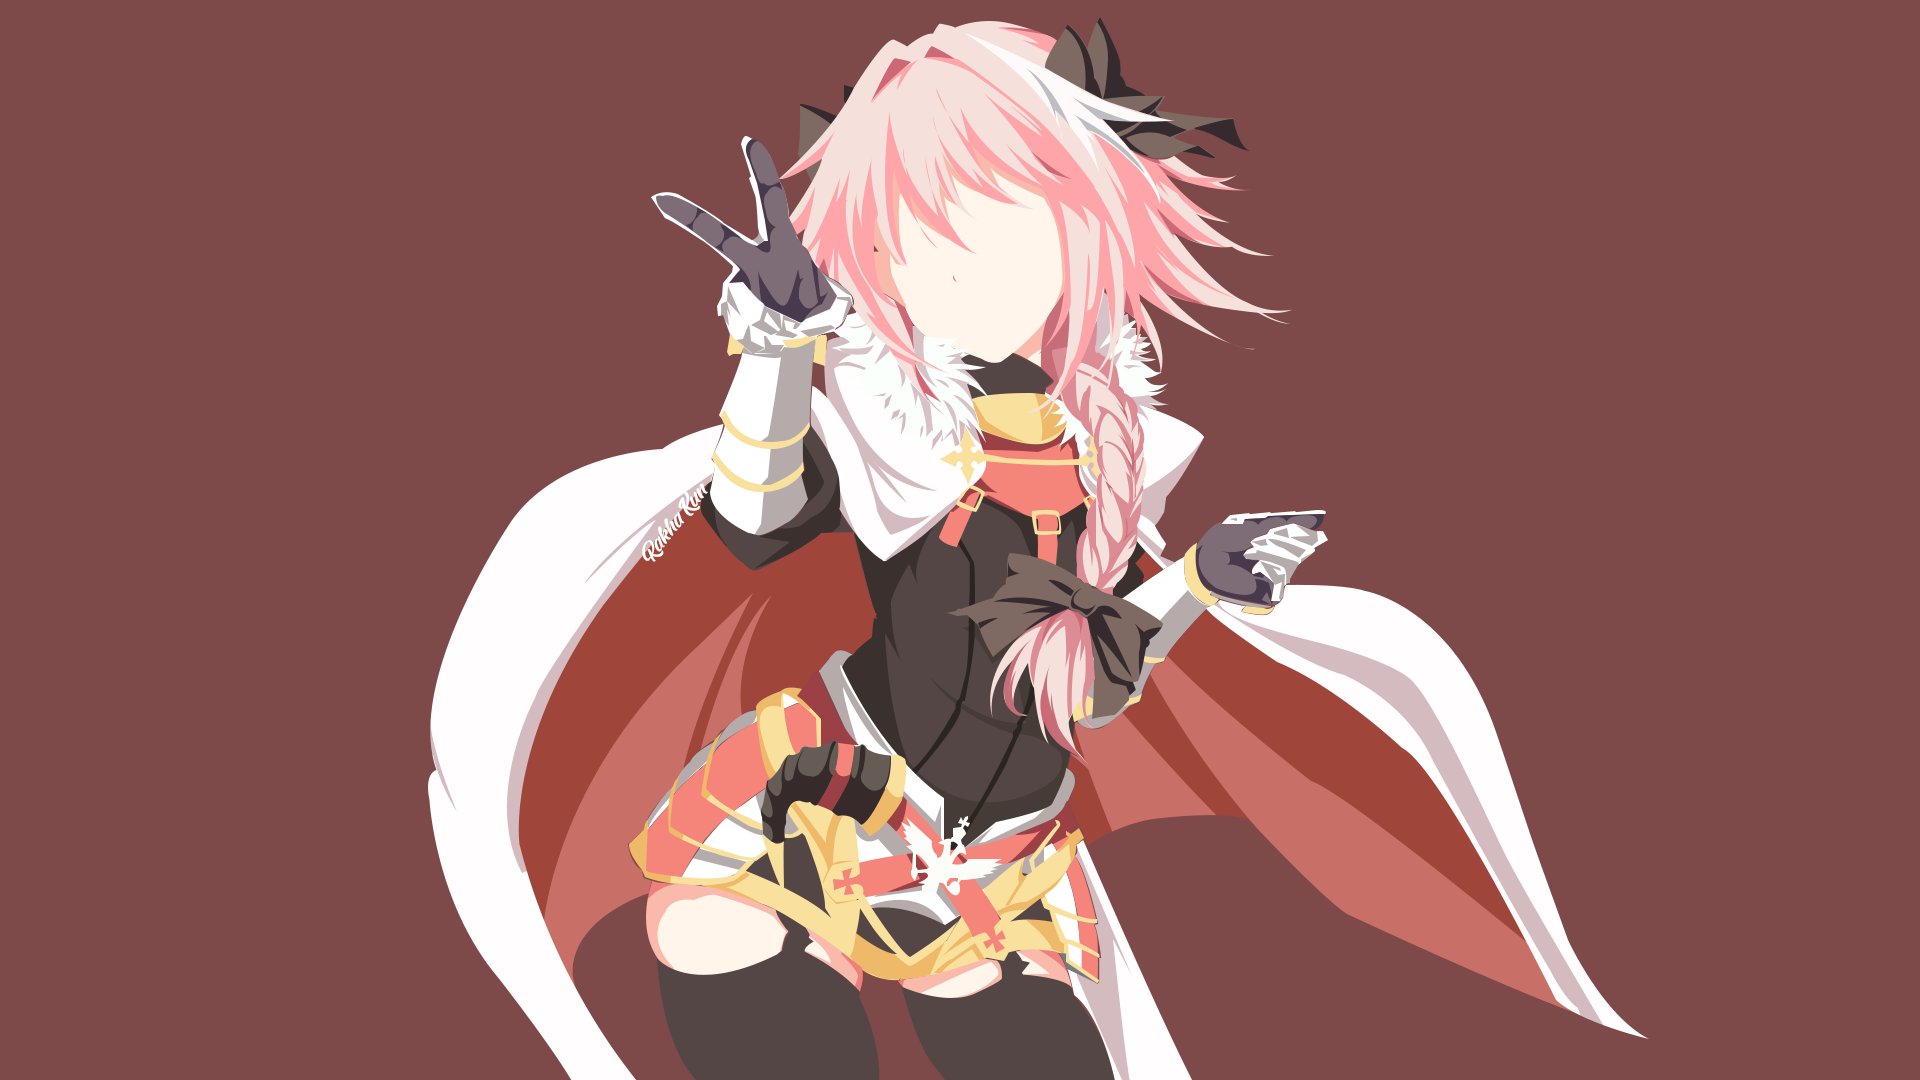 Astolfo Fate Apocrypha Astolfo Fate Grand Order Rider Of Black Fate Grand Order Minimalism Simple Ba 1920x1080